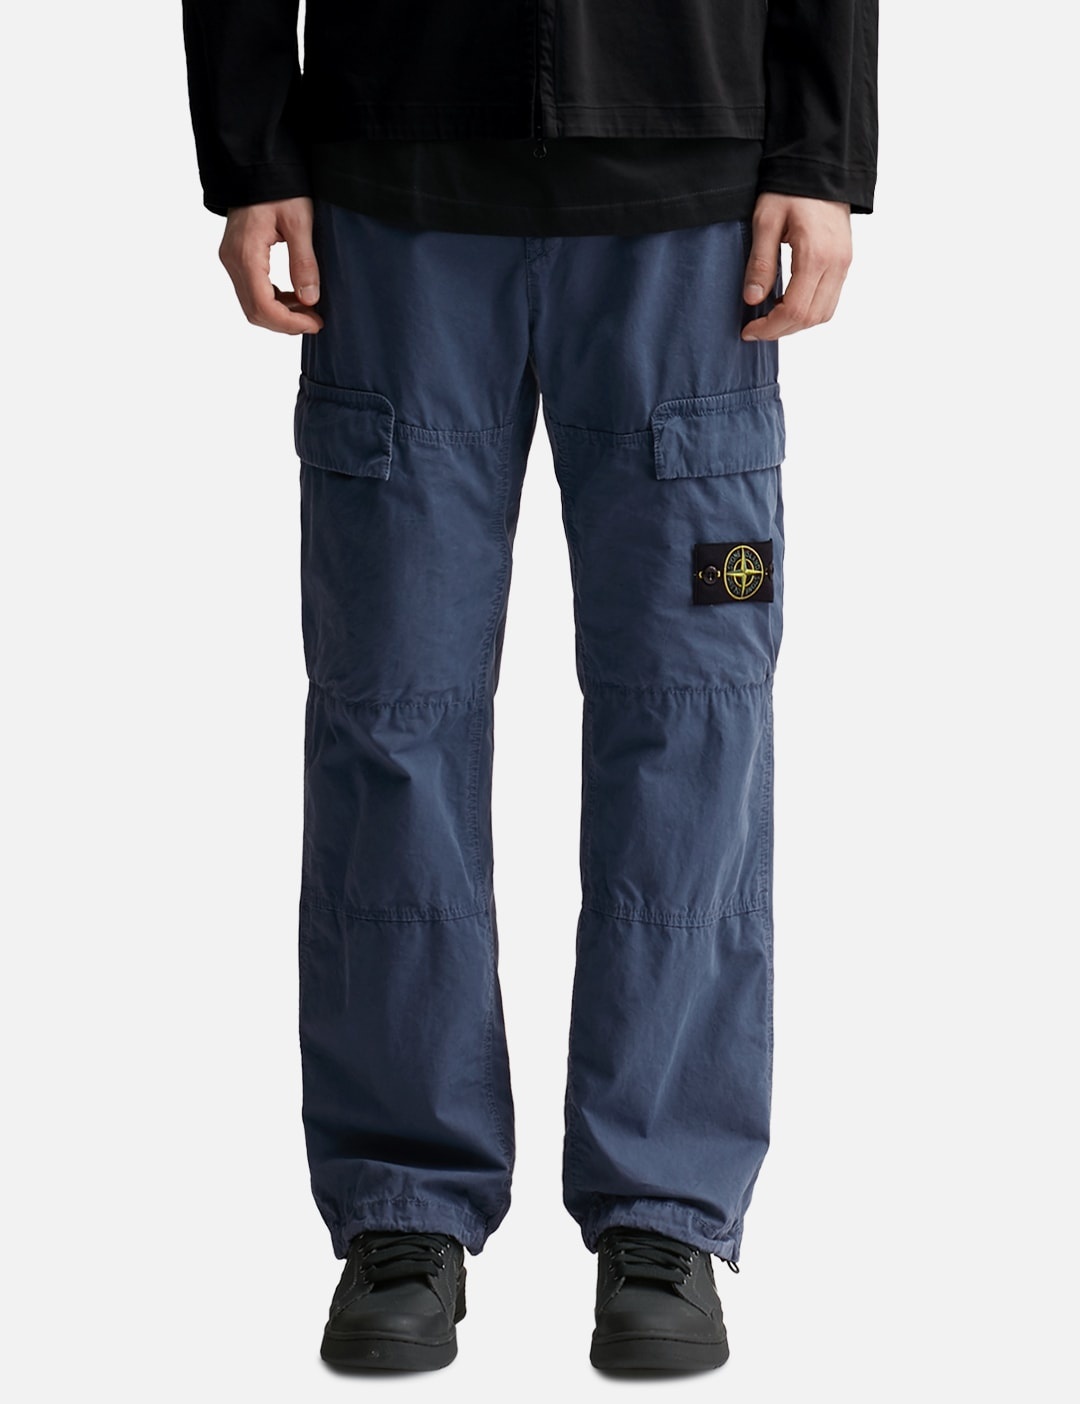 'OLD' TREATMENT CARGO PANTS - 3